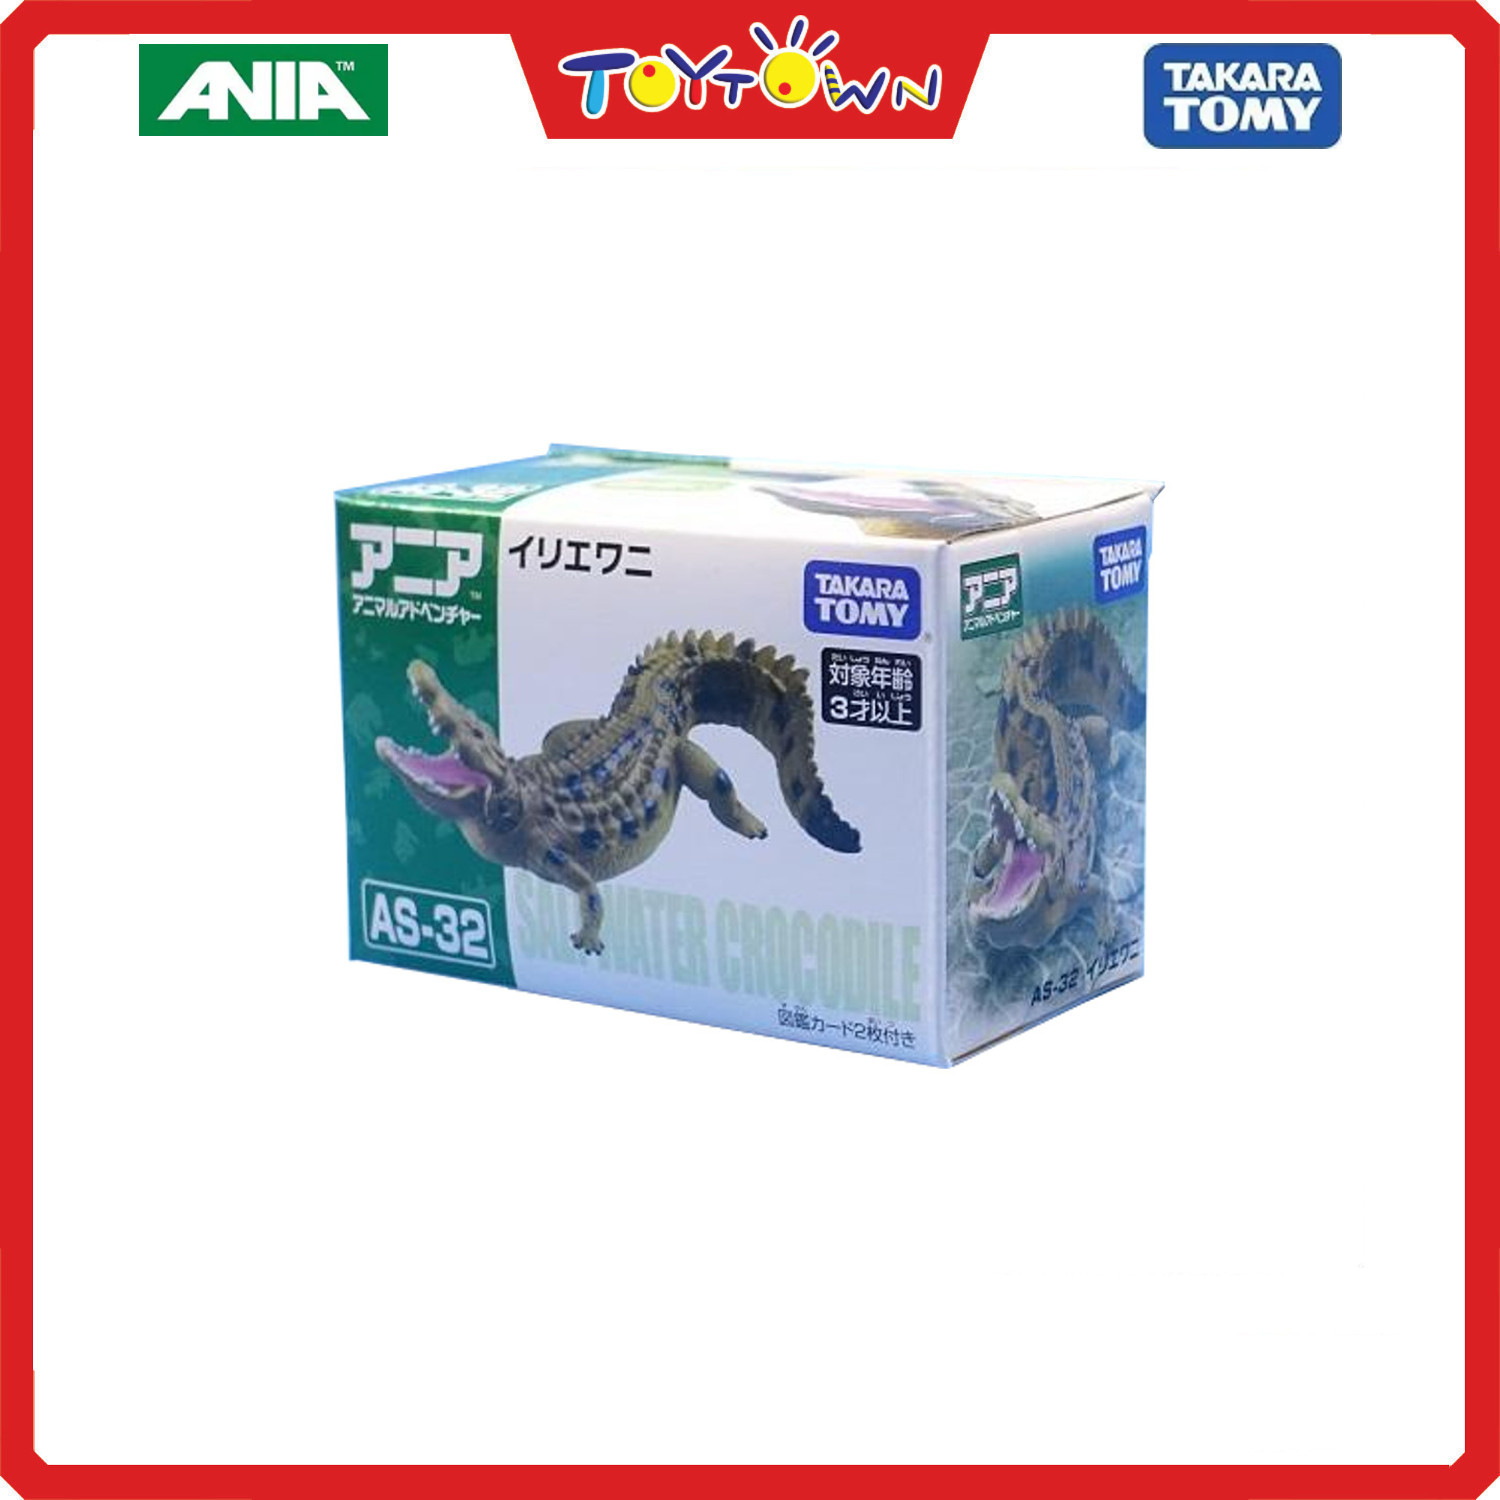 Ania AS-32 Saltwater crocodile (Animal Figure) - HobbySearch Toy Store